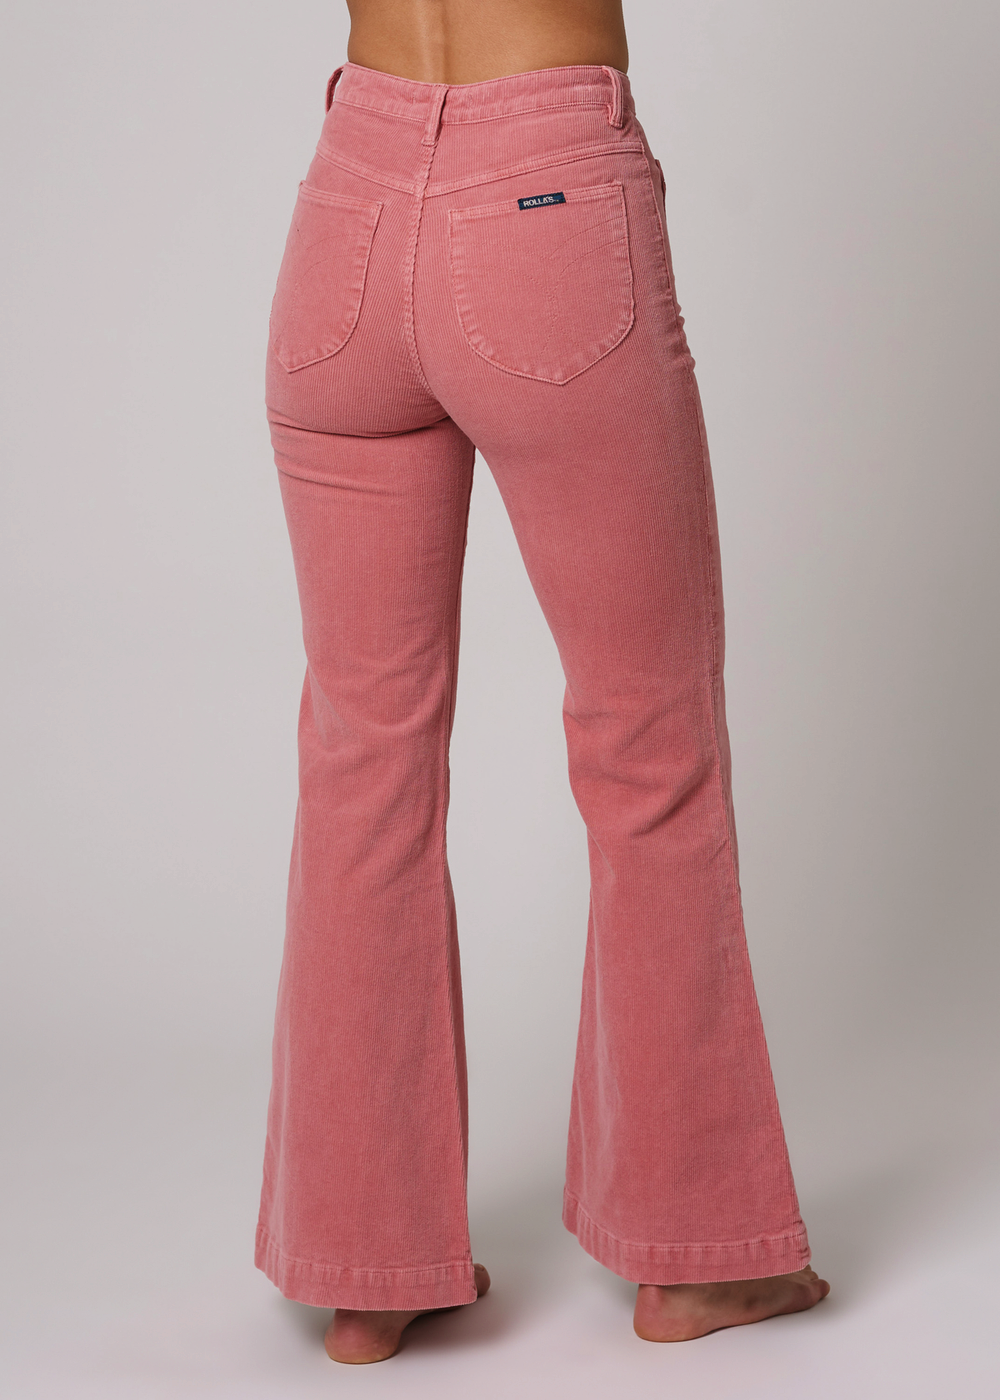 Retro 70s inspired Rolla's Eastcoast Corduroy Flare Bell Bottoms with Sailor Patch Pockets. Rose pink colorway. 